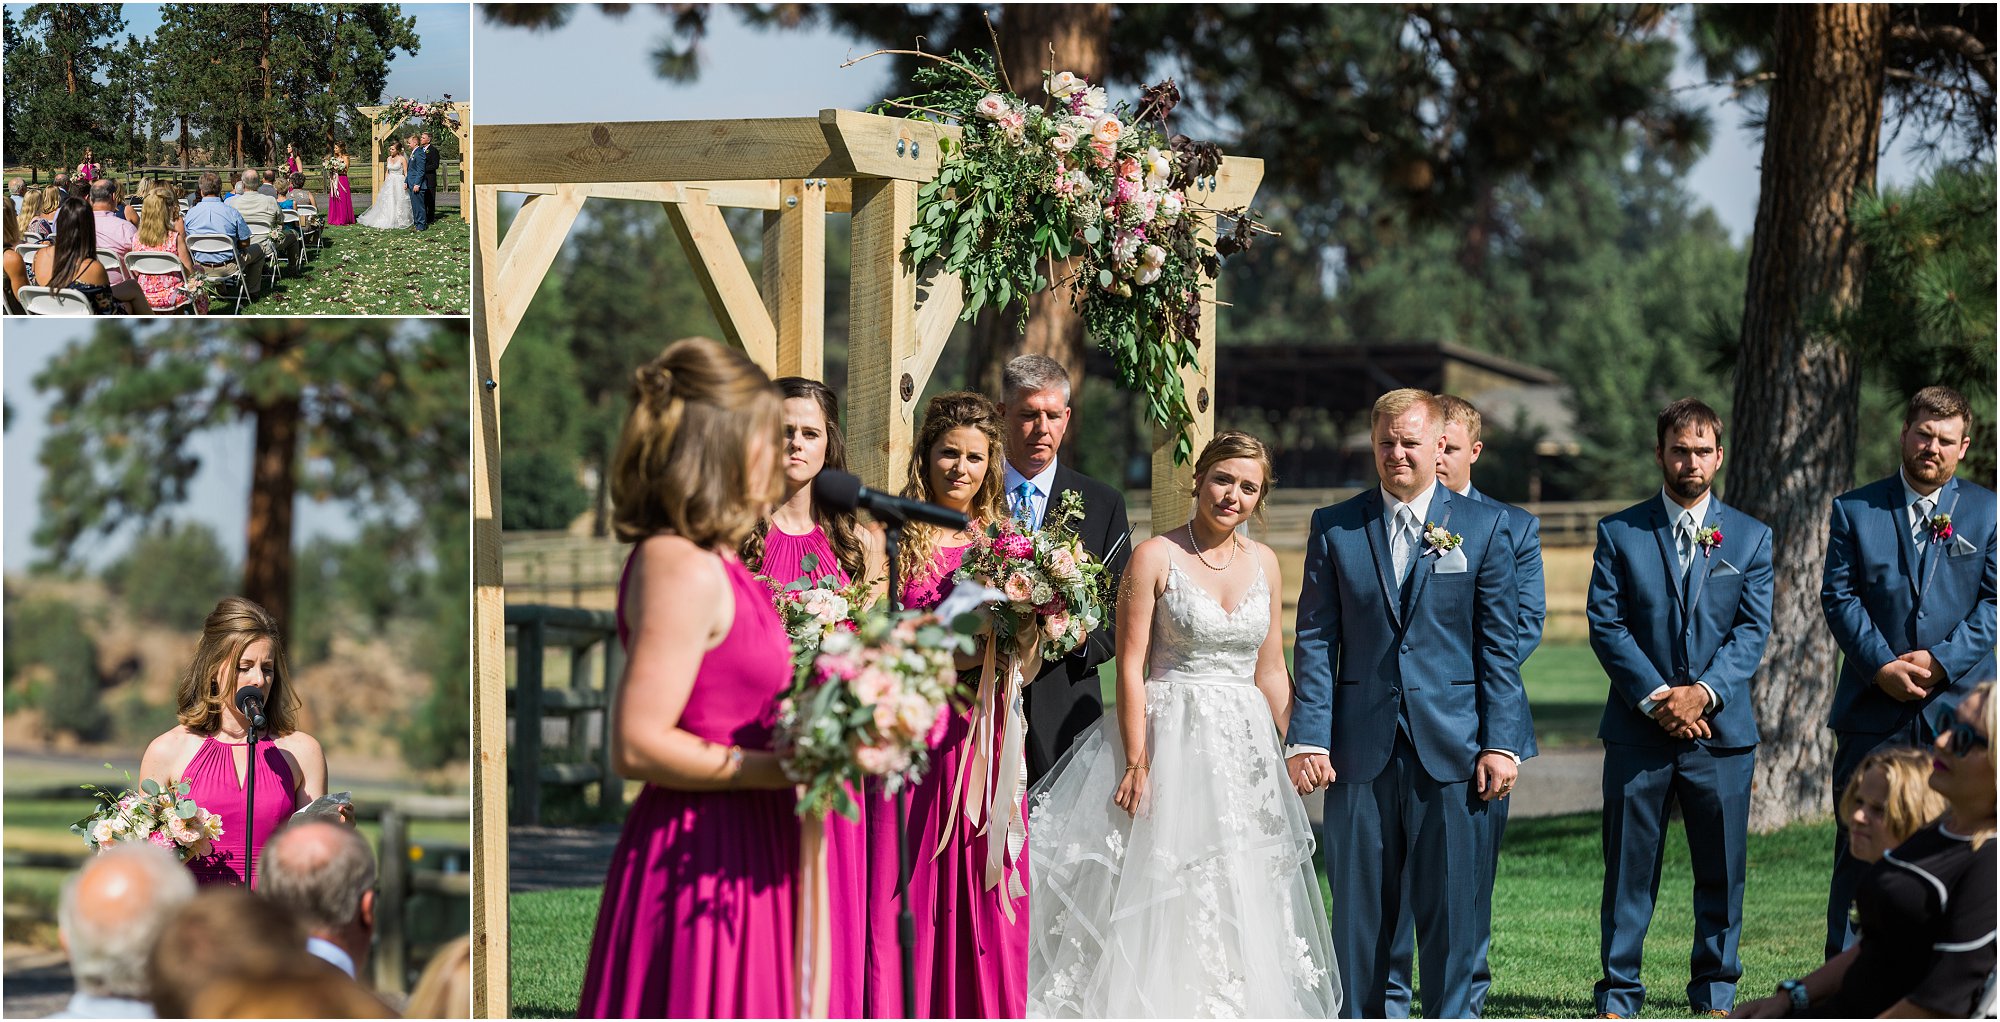 The sister of the groom, also a bridesmaid, does a reading for this rustic outdoor wedding ceremony at Rock Springs Ranch in Bend, OR. | Erica Swantek Photography